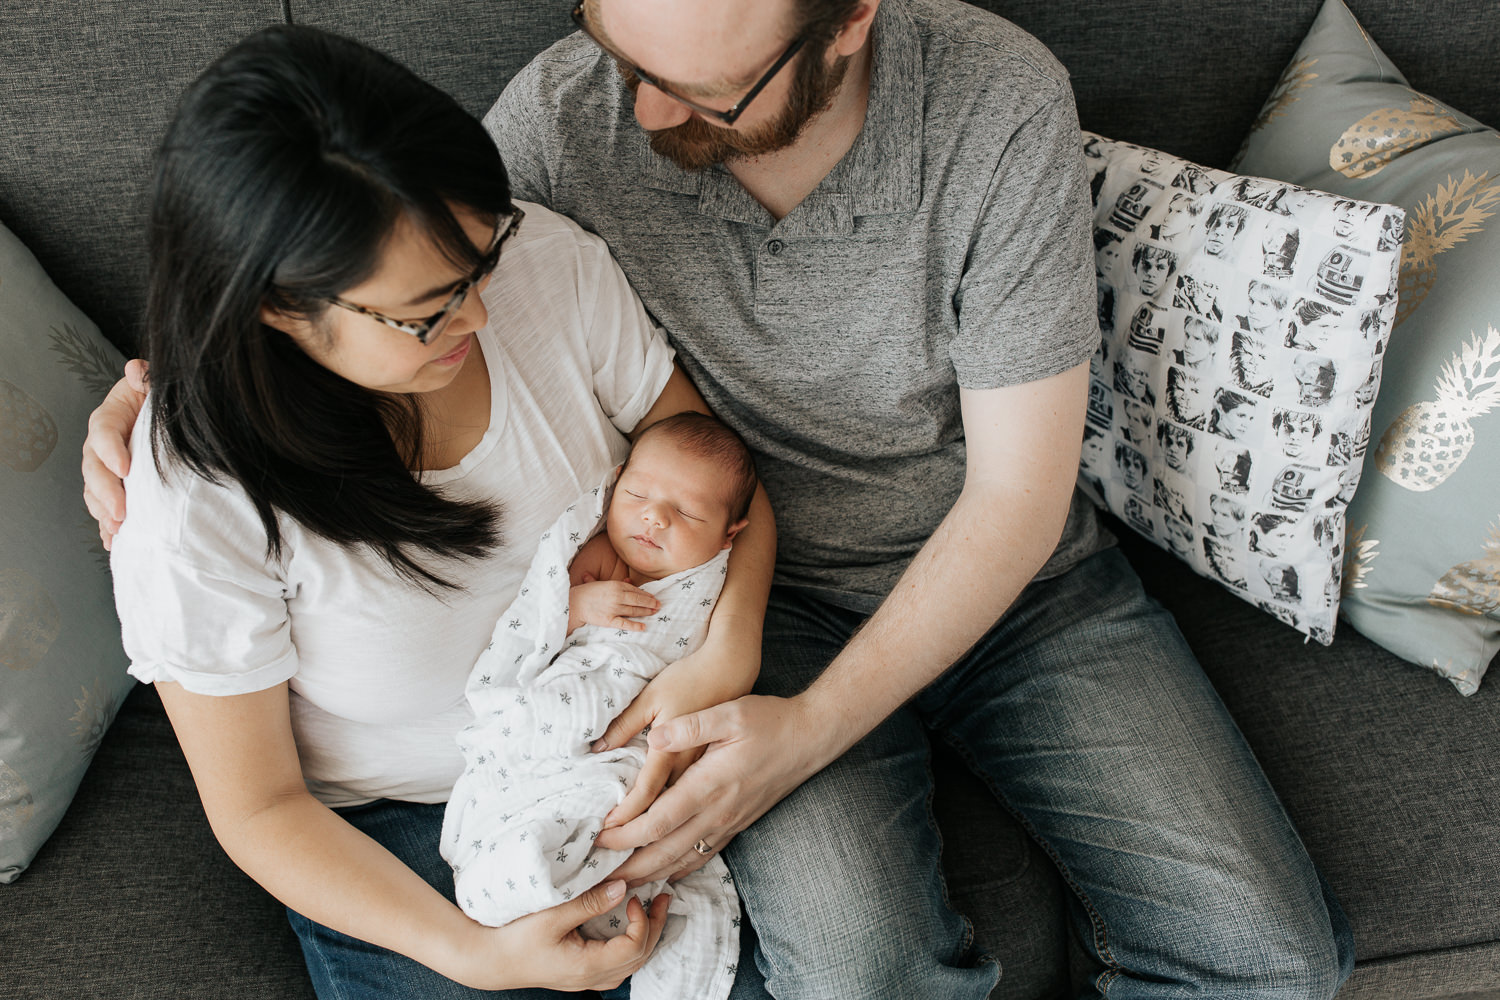 family of 3 sitting on couch, new mom holding sleeping, swaddled 2 week old baby boy, dad next to them with arm around wife and hand on son, parents smiling - GTA Lifestyle Photography